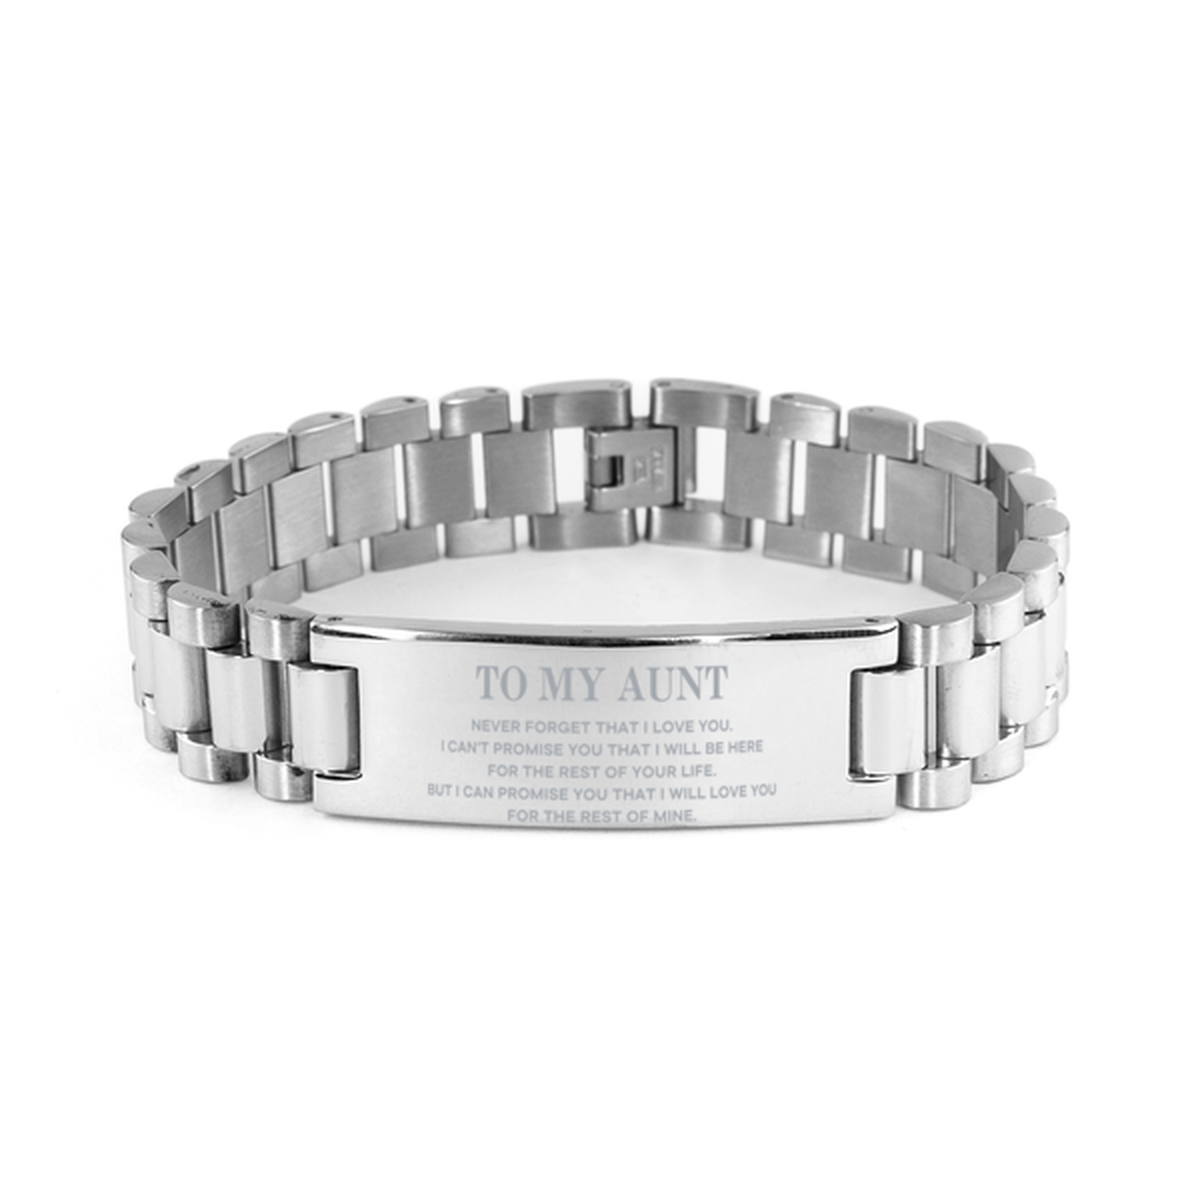 To My Aunt Gifts, I will love you for the rest of mine, Love Aunt Bracelet, Birthday Christmas Unique Ladder Stainless Steel Bracelet For Aunt